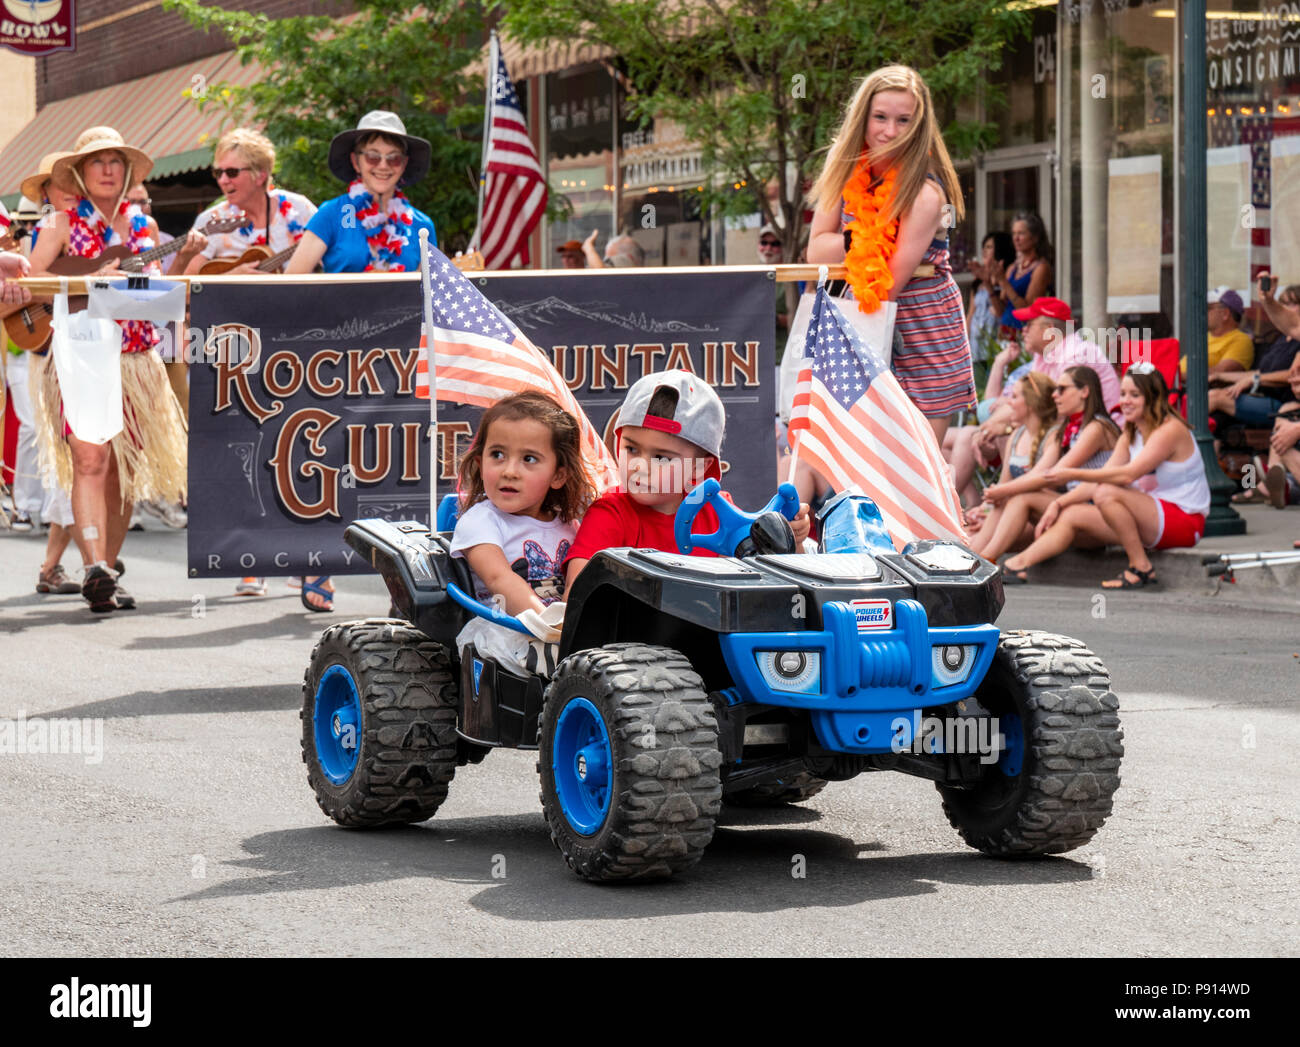 Children drive toy 4-wheeler in annual Fourth of July Parade in the small Colorado mountain town of Salida. Stock Photo